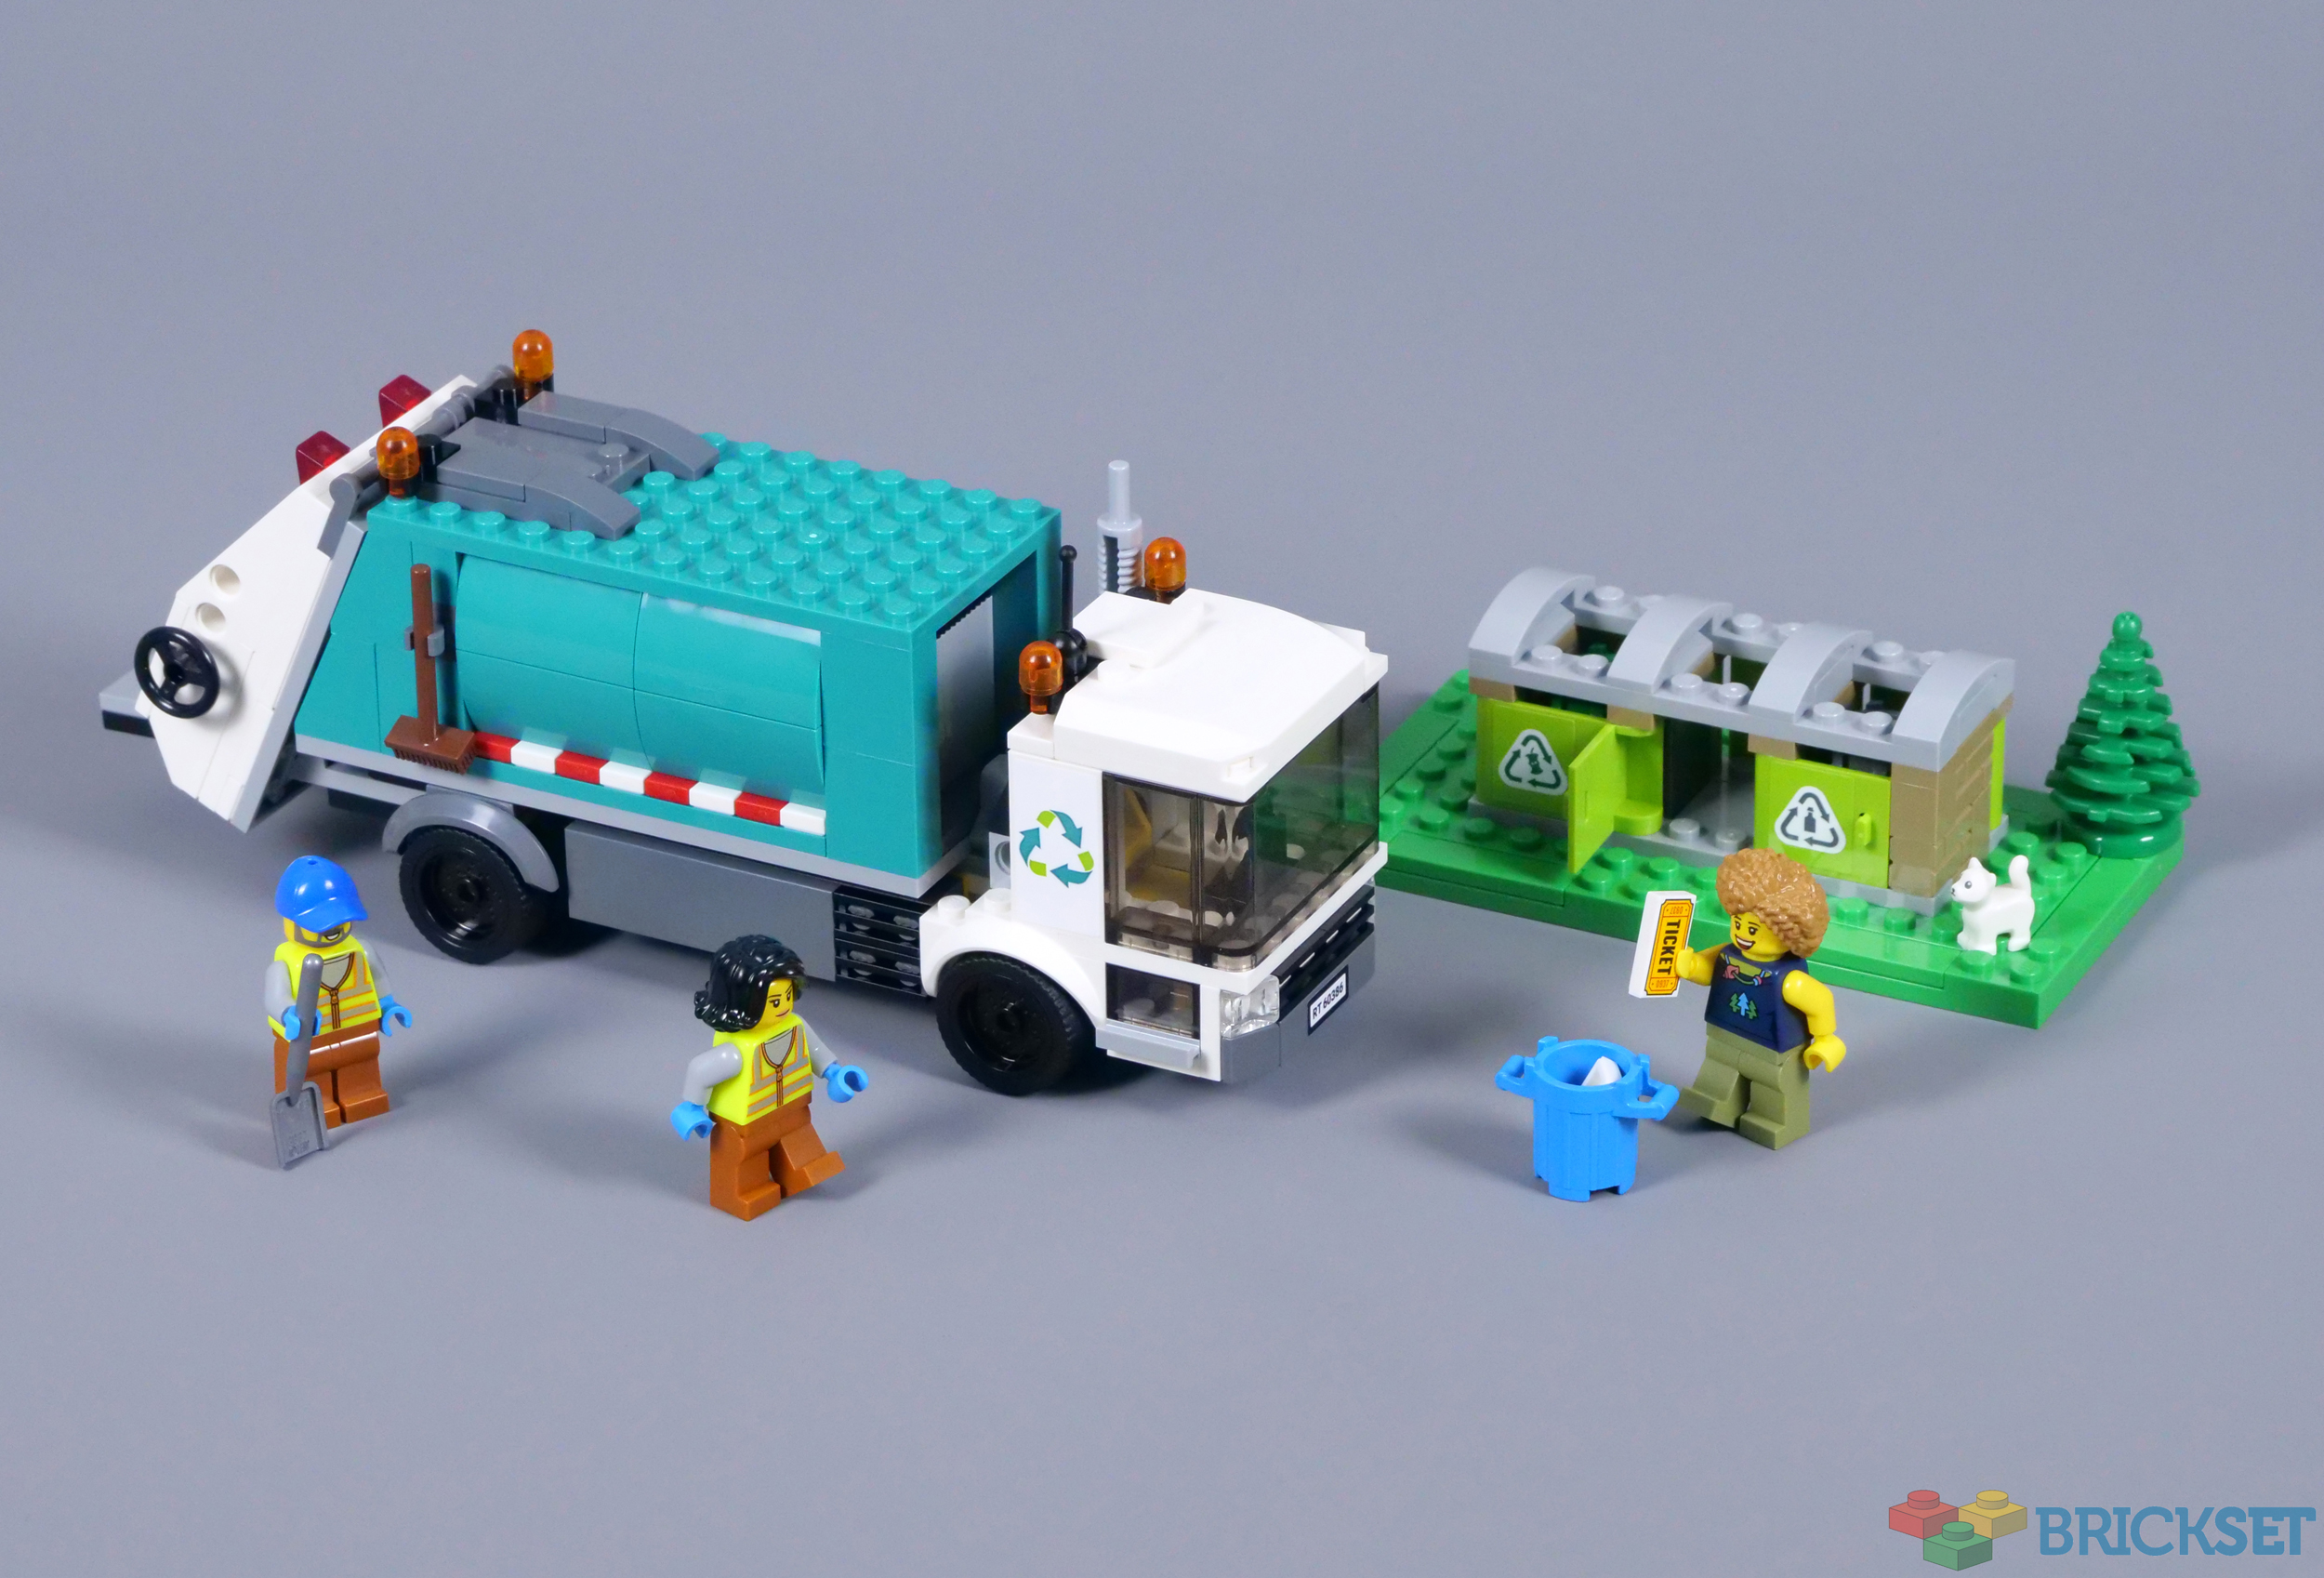 | Brickset 60386 Recycling LEGO Truck review